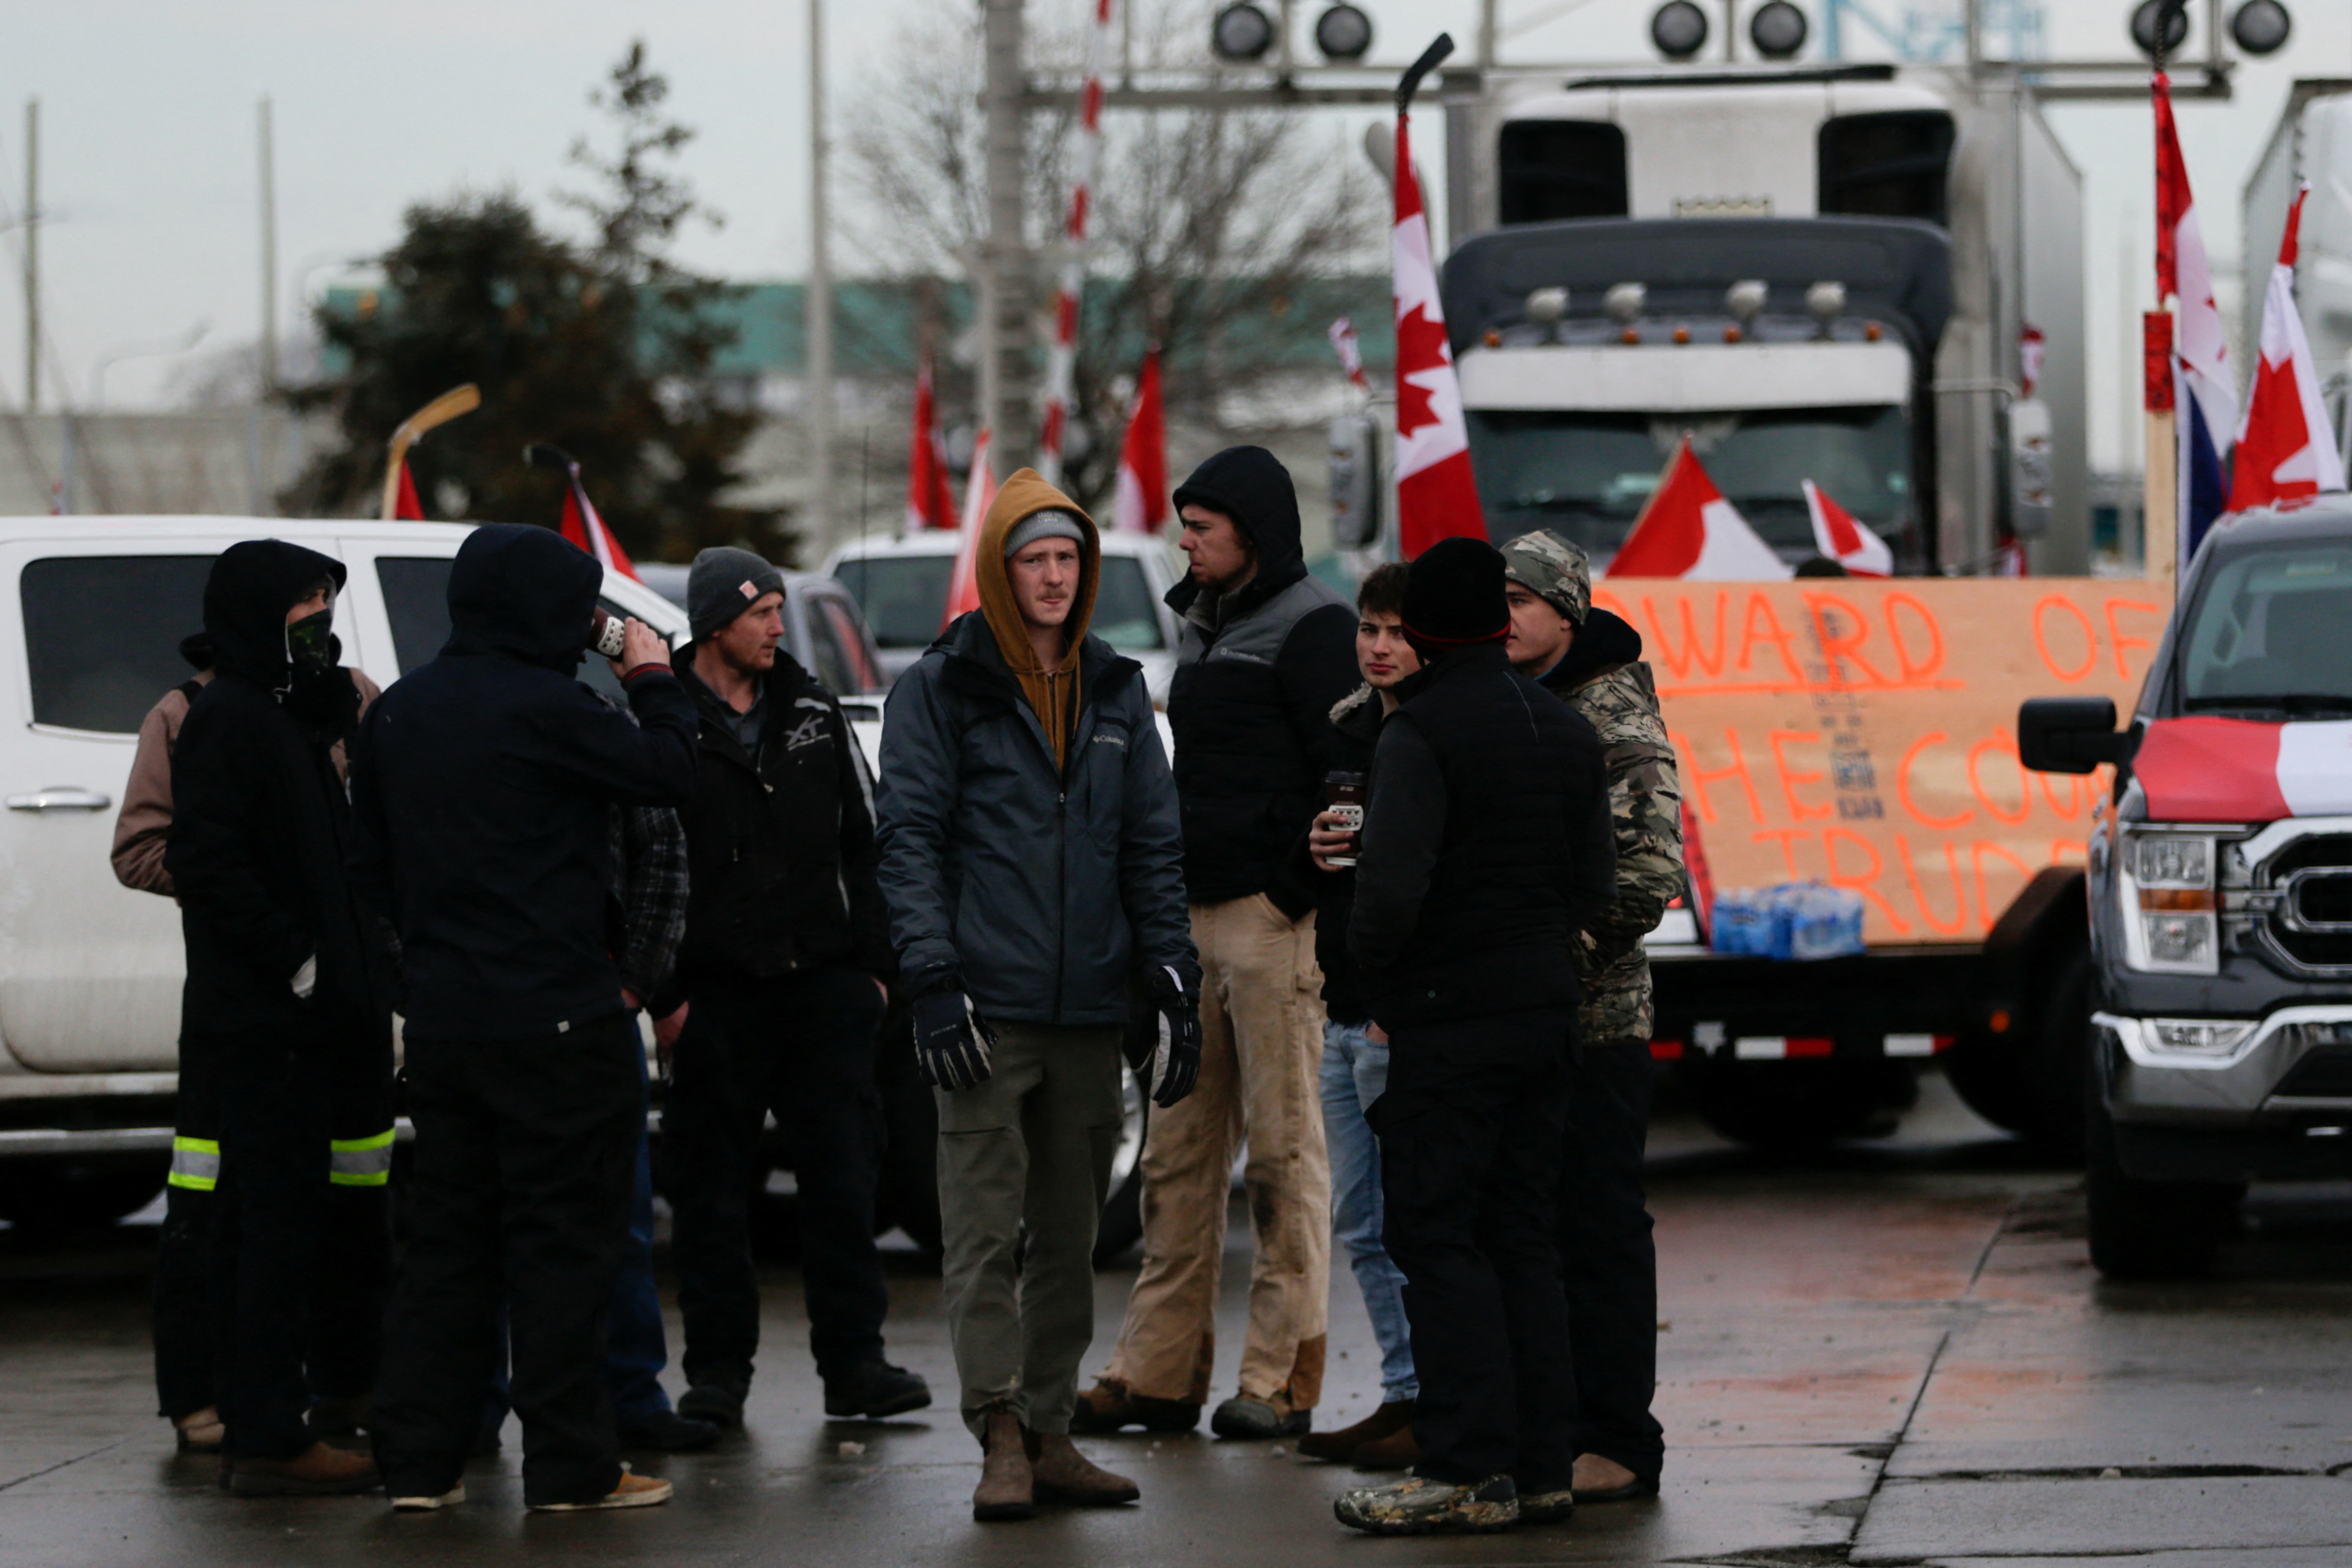 Truckers continue to protest against COVID-19 mandates in Canada